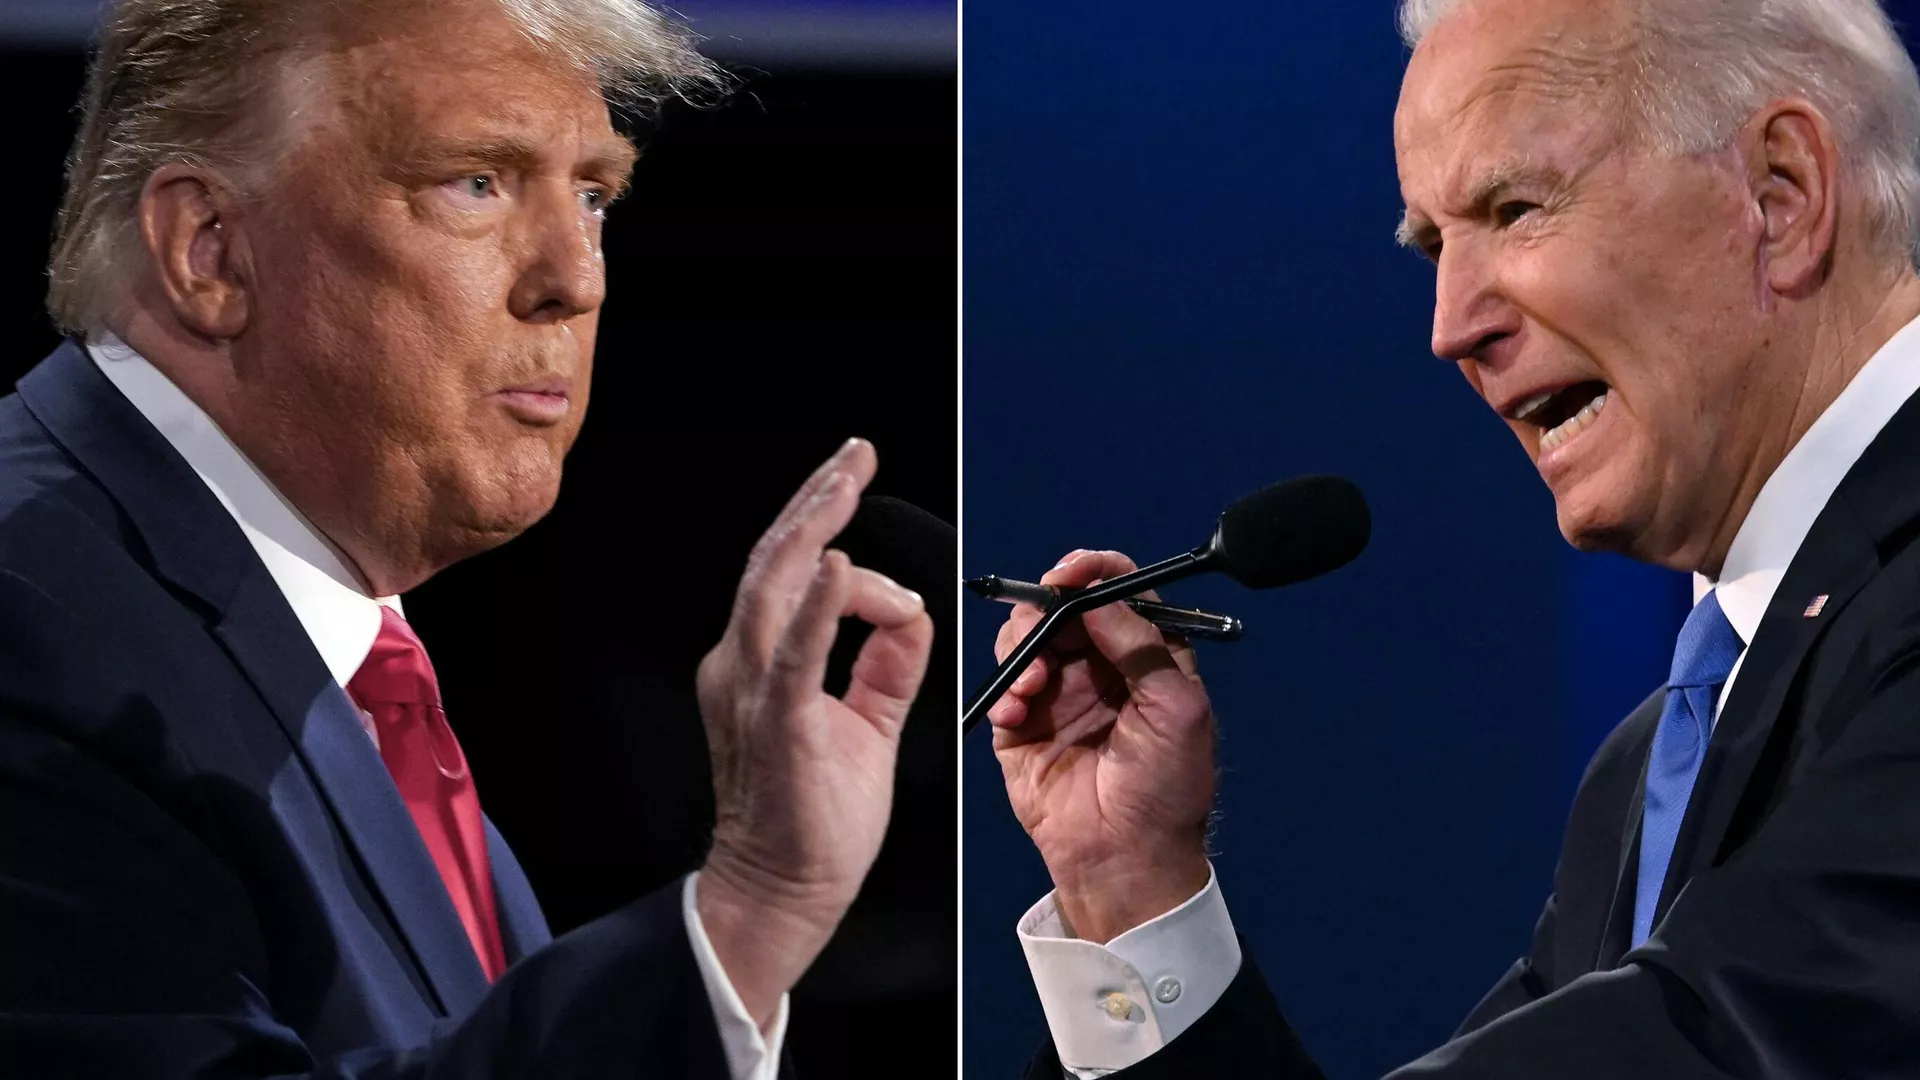 Dead Heat: New Poll Shows Trump, Biden Tied in Voter Preferences for 2024 Election